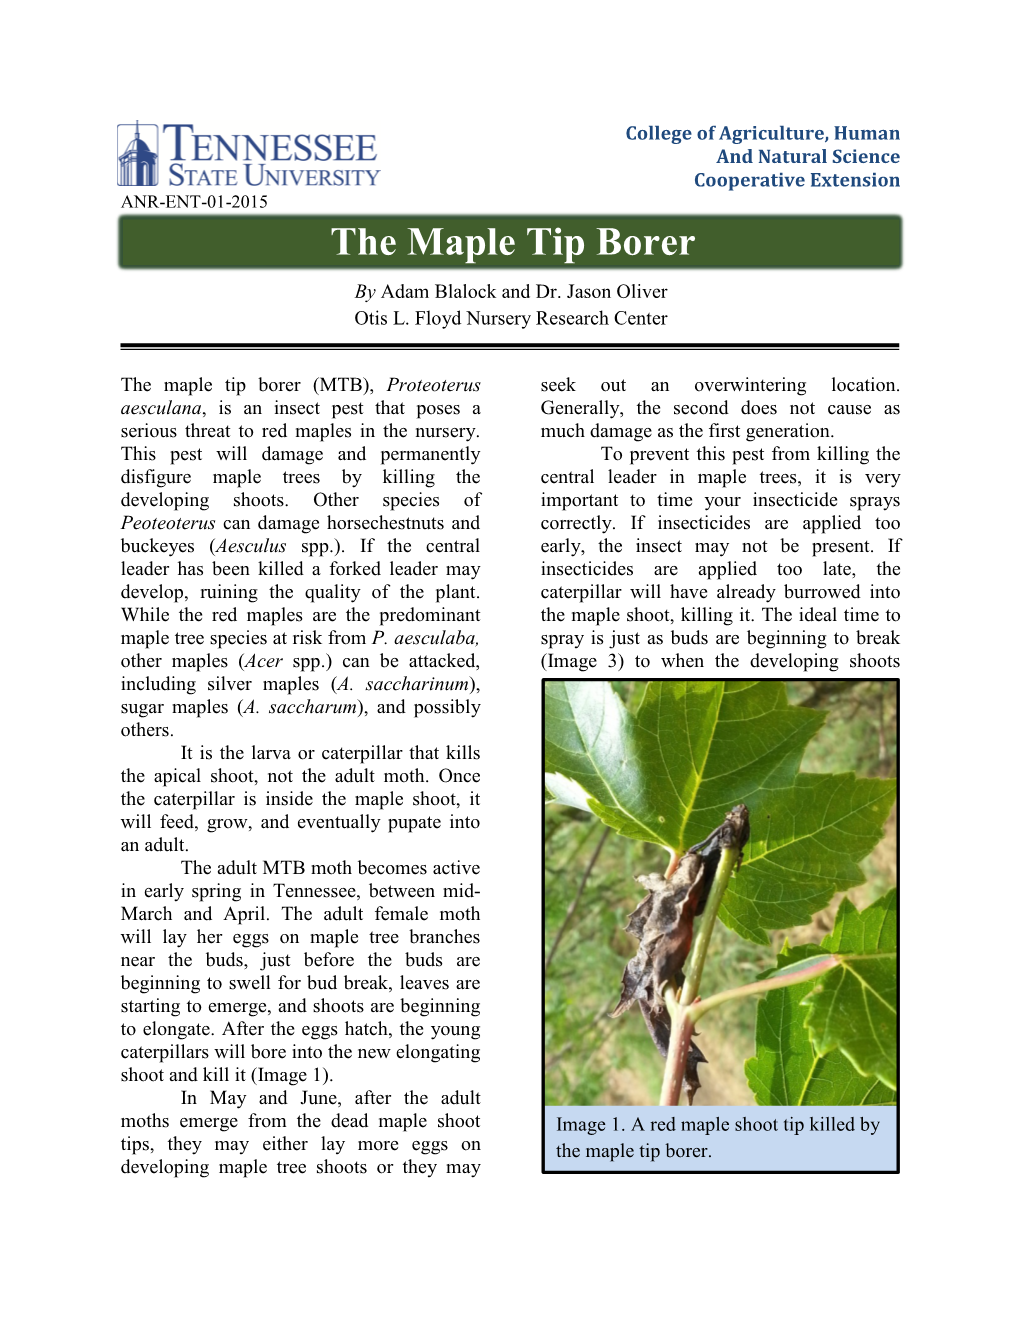 The Maple Tip Borer by Adam Blalock and Dr